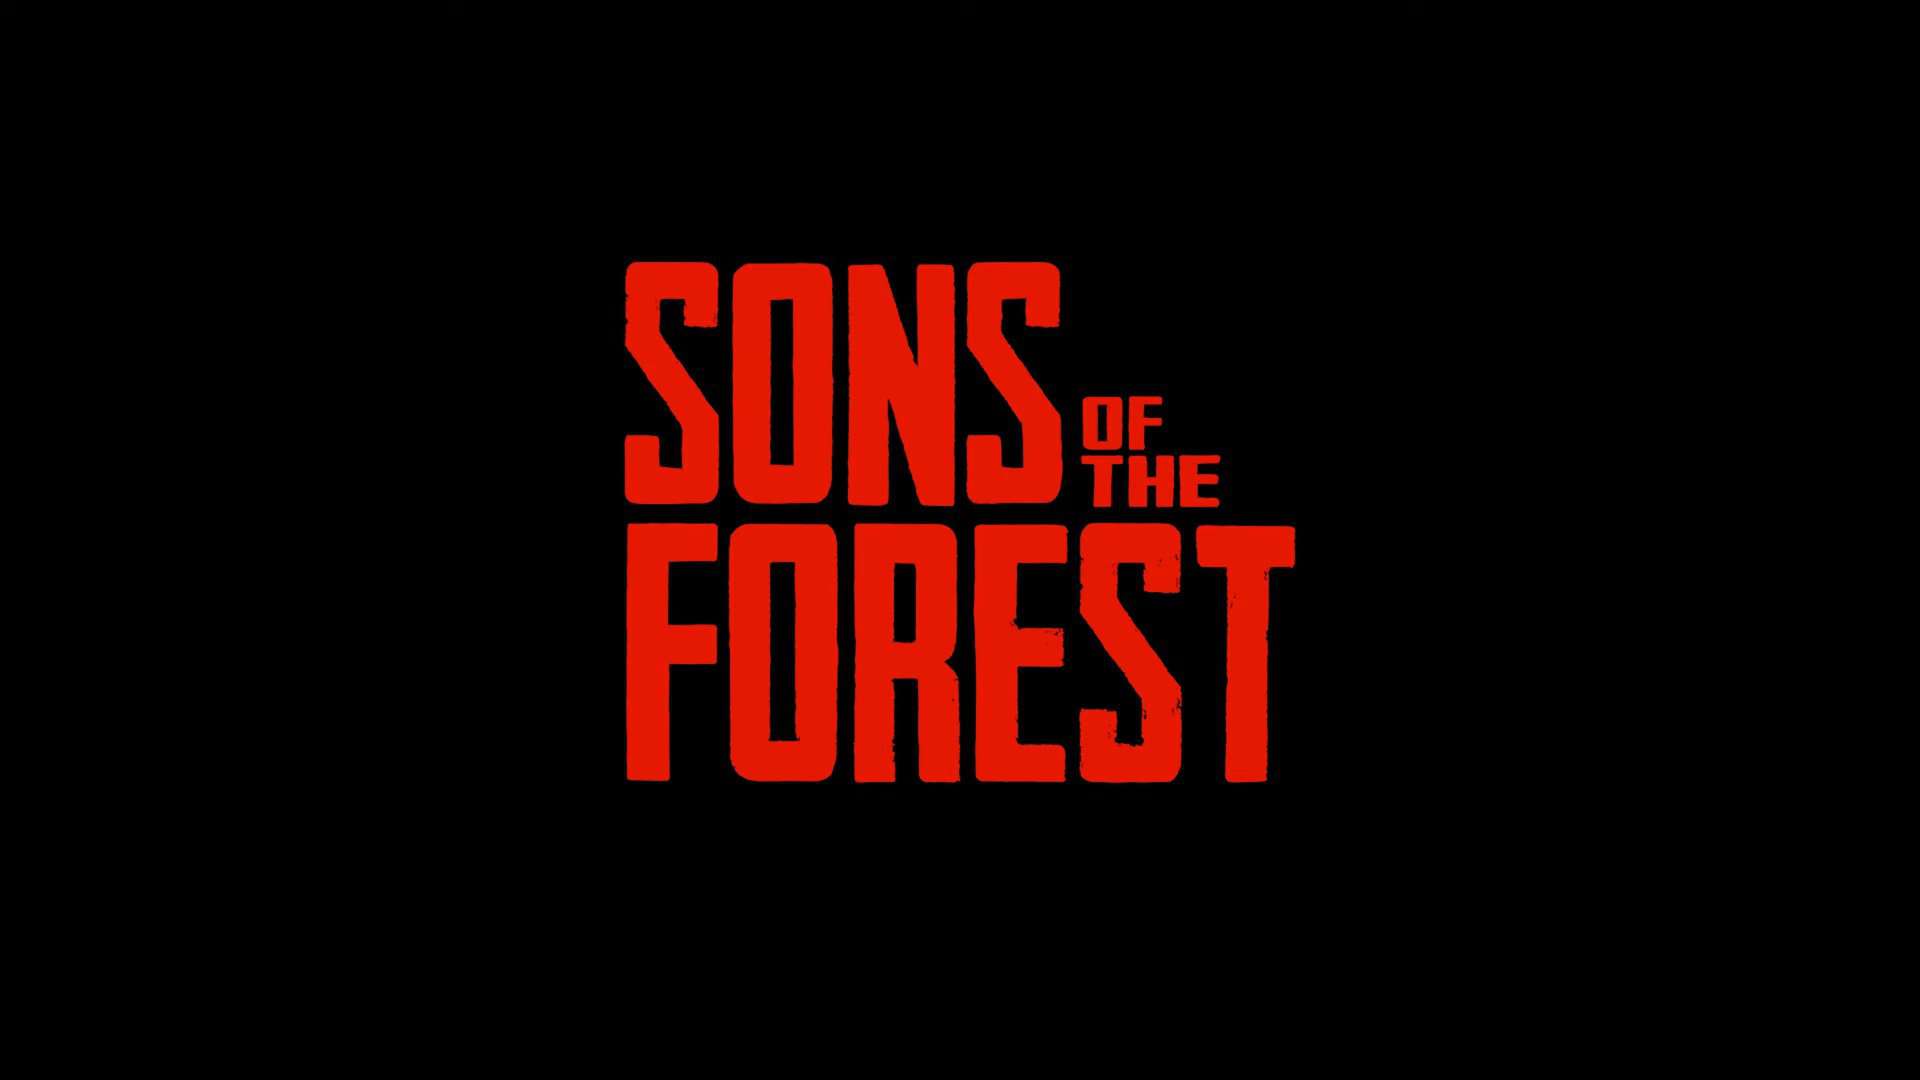 Sons of the Forest update patch notes – Patch 01 is here